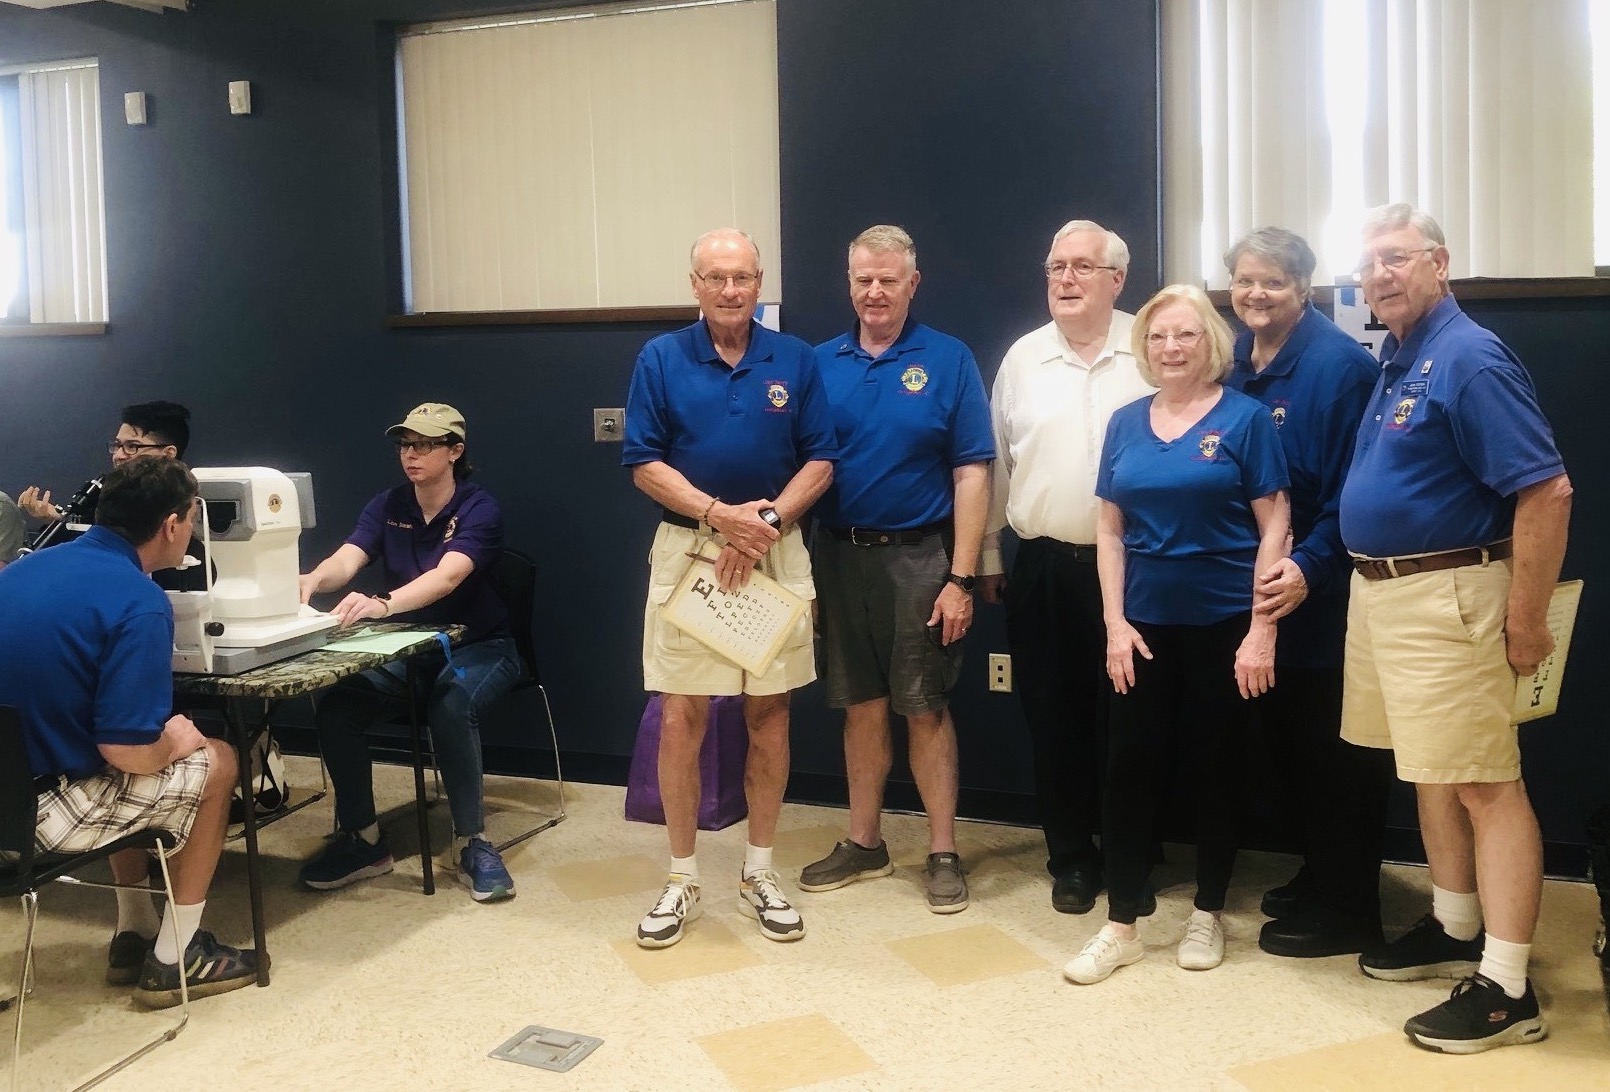 Youngstown Lions Club members volunteer at a recent eye clinic. From left: Terry Cummings, Stu Comerford, Art Askins, Sue DeJoseph, Nancy Askins and John Stepien. Not pictured: Paul Rampado. (Submitted)